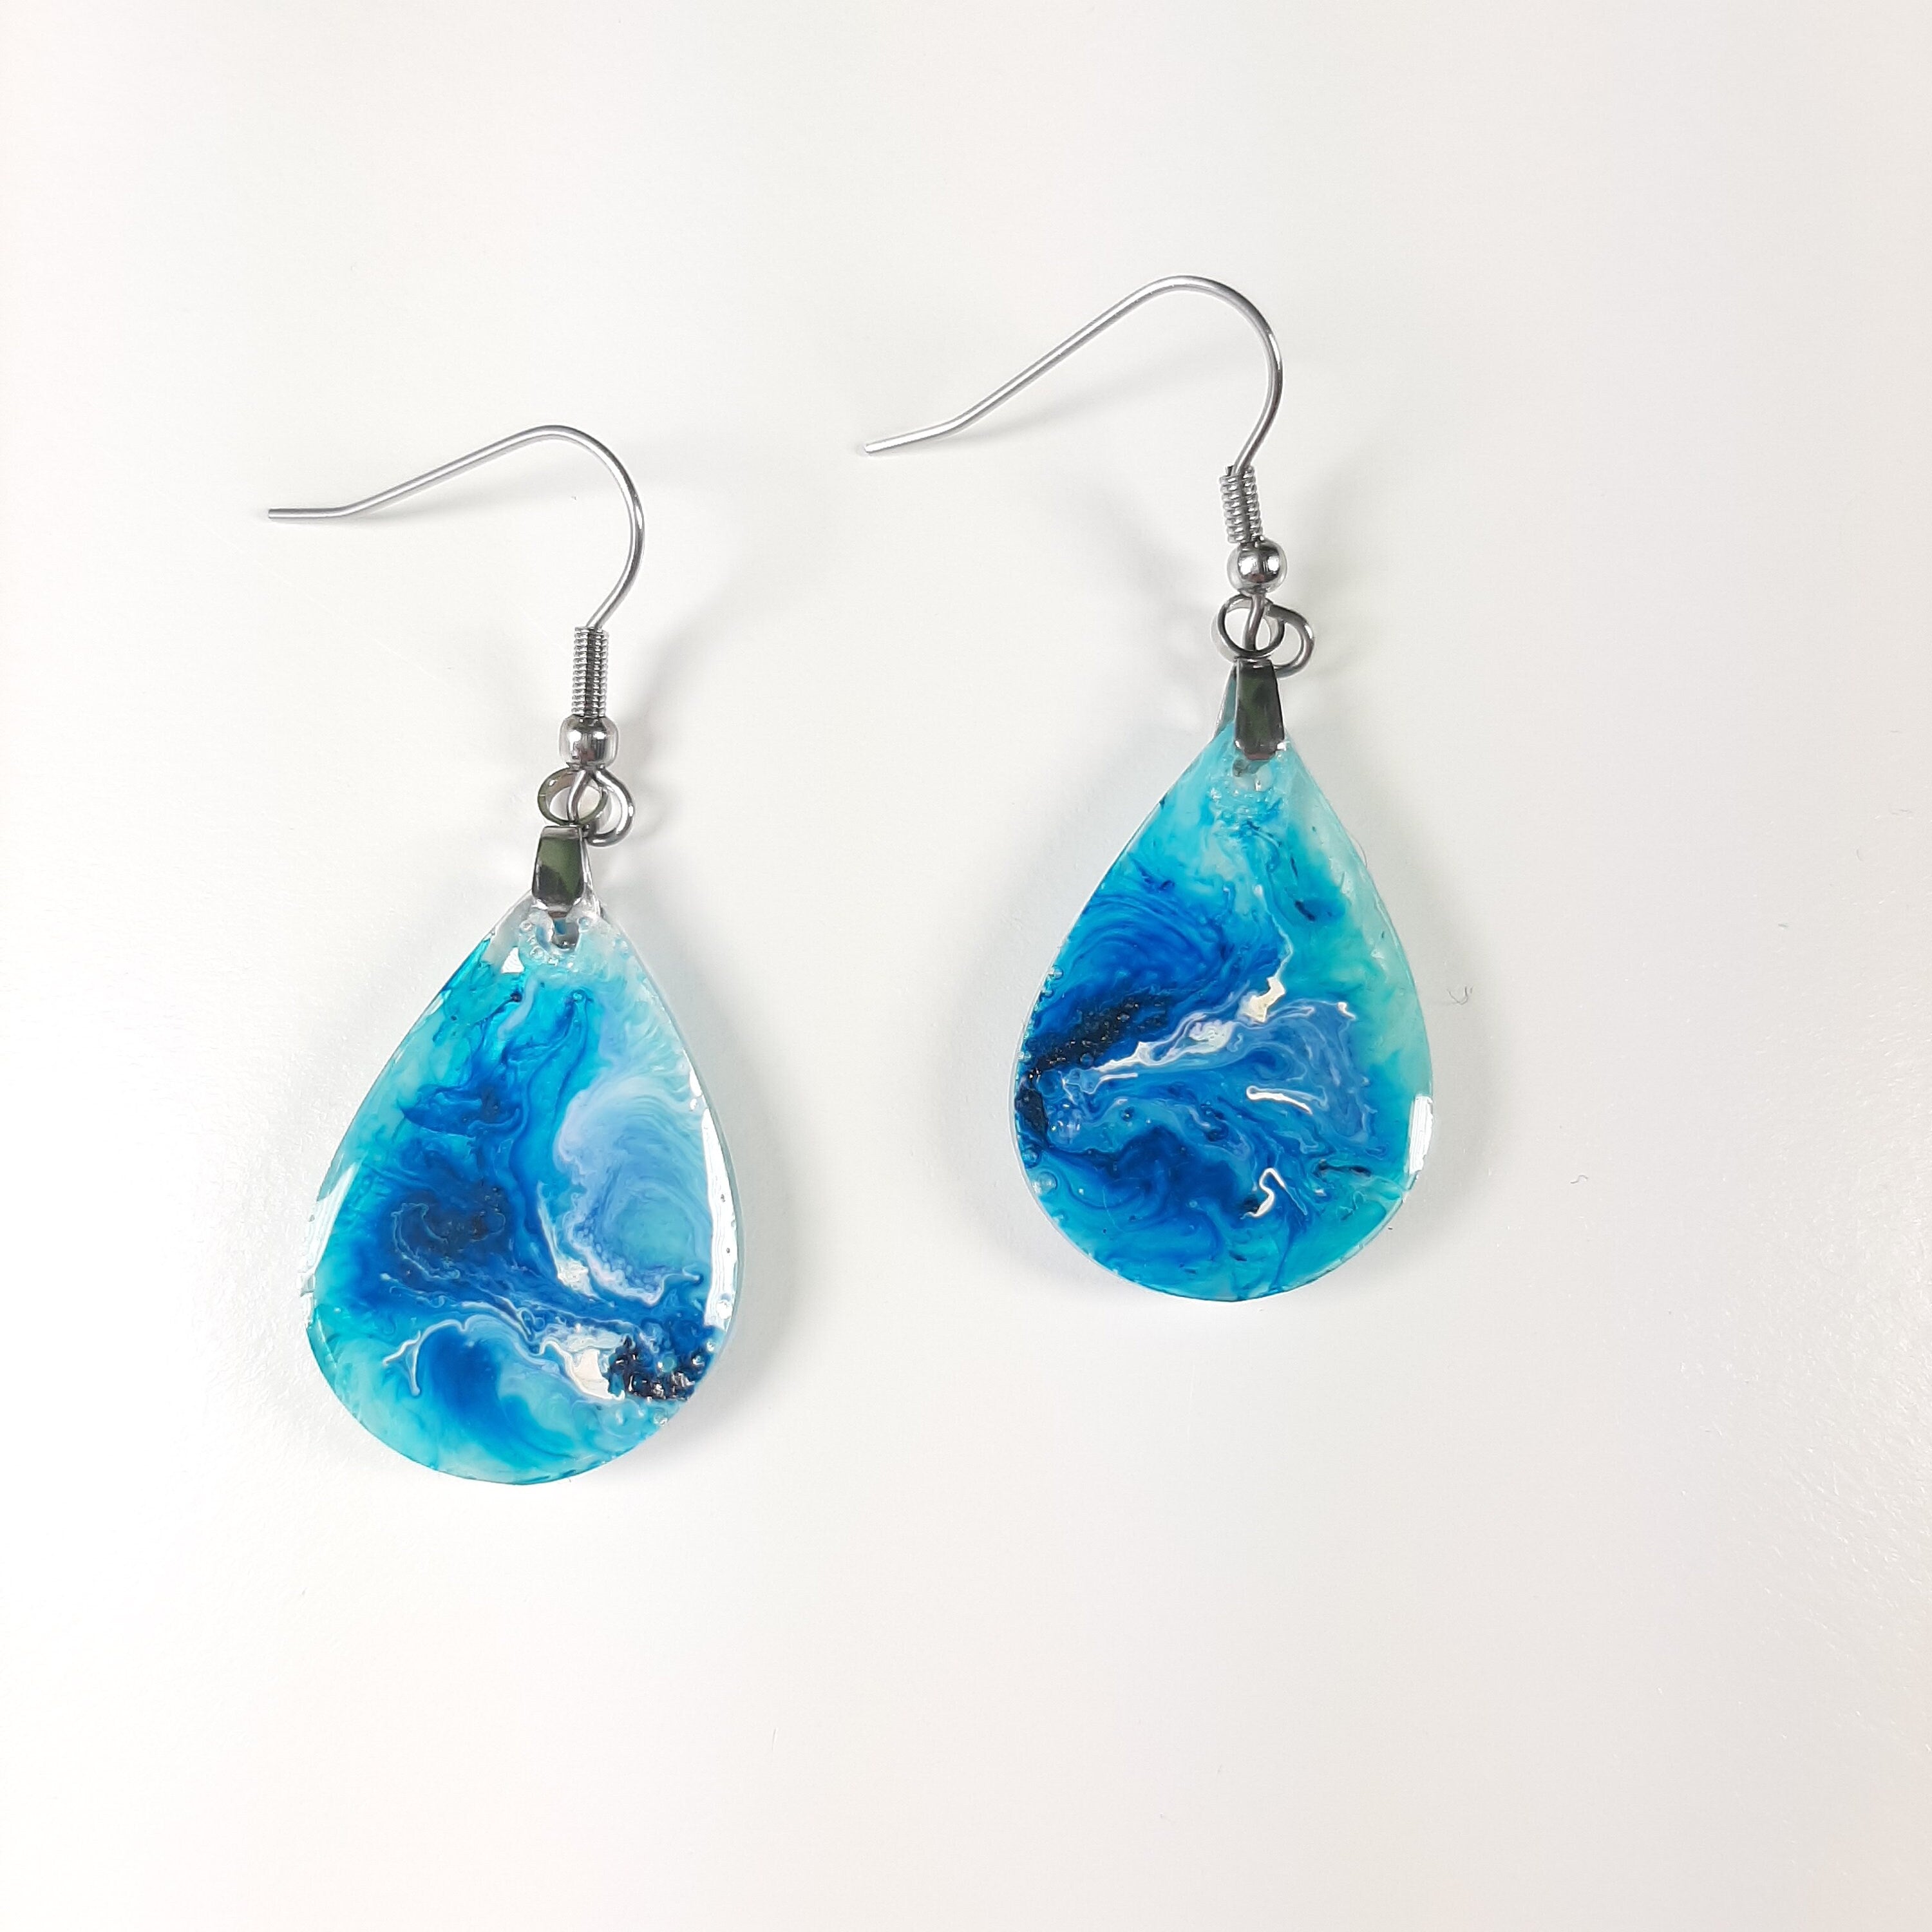 Resin and Alcohol Ink Blue and White Earrings